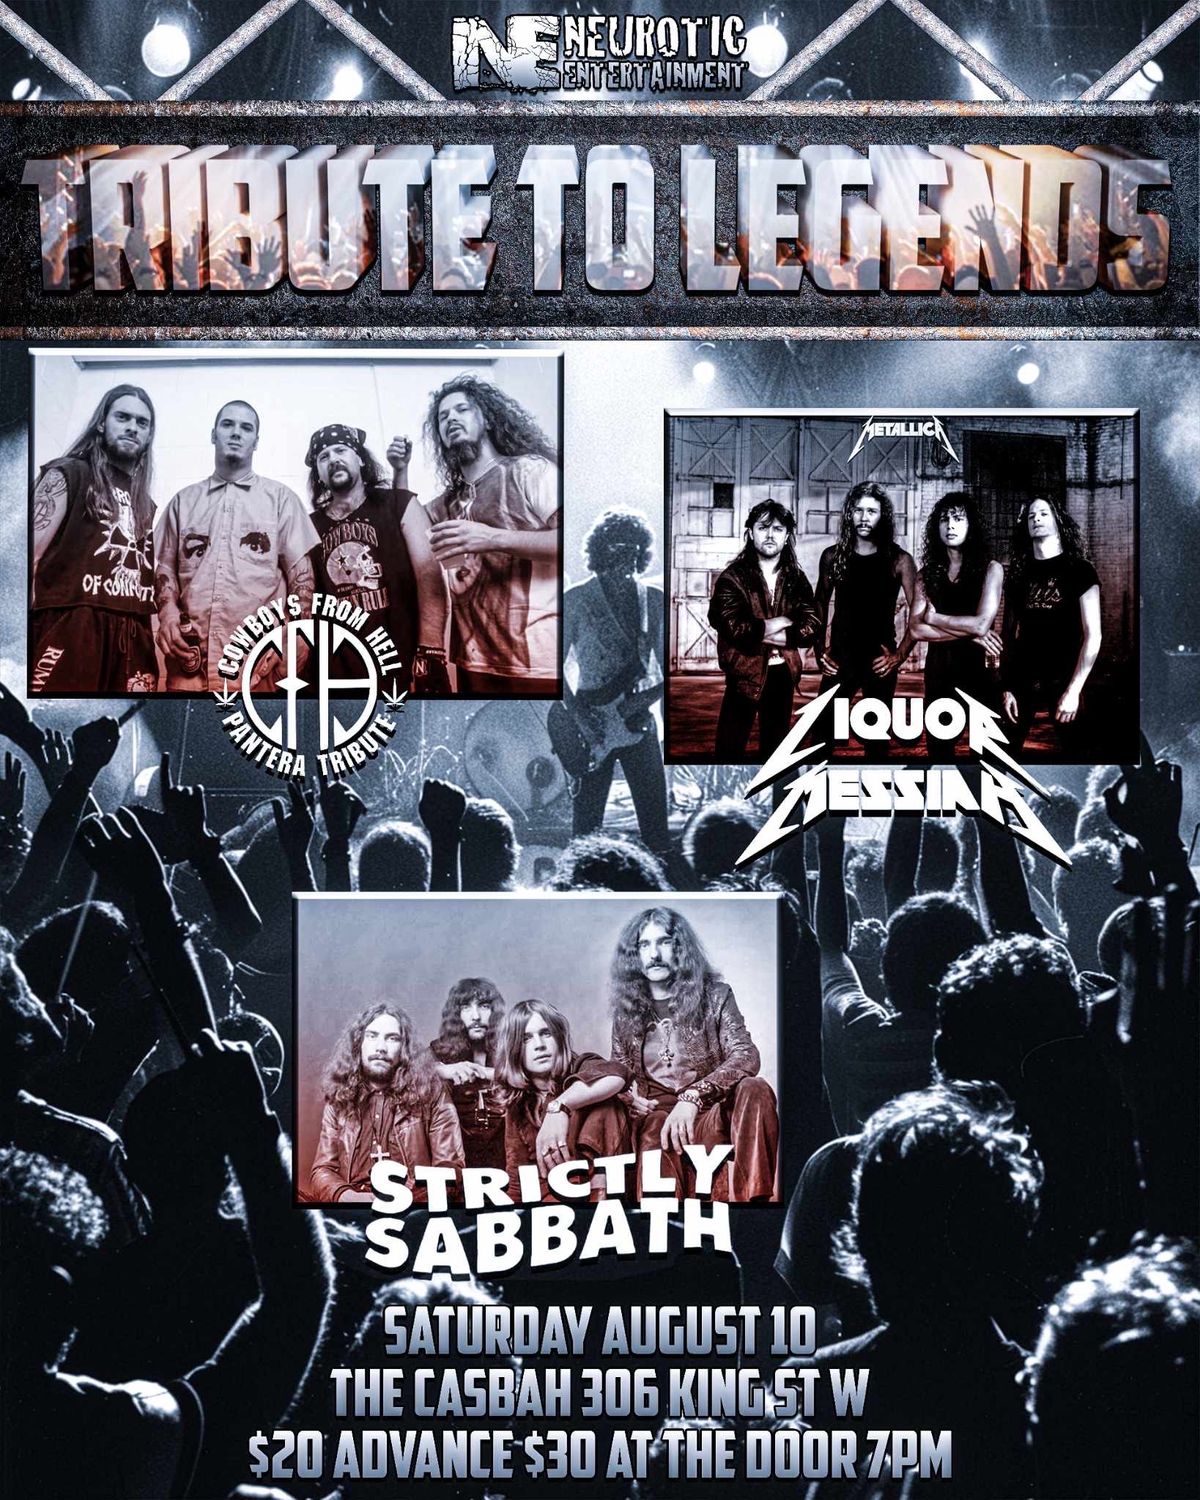 Tribute to Legends w\/ Cowboys from Hell, Liquor Messiah & Strictly Sabbath